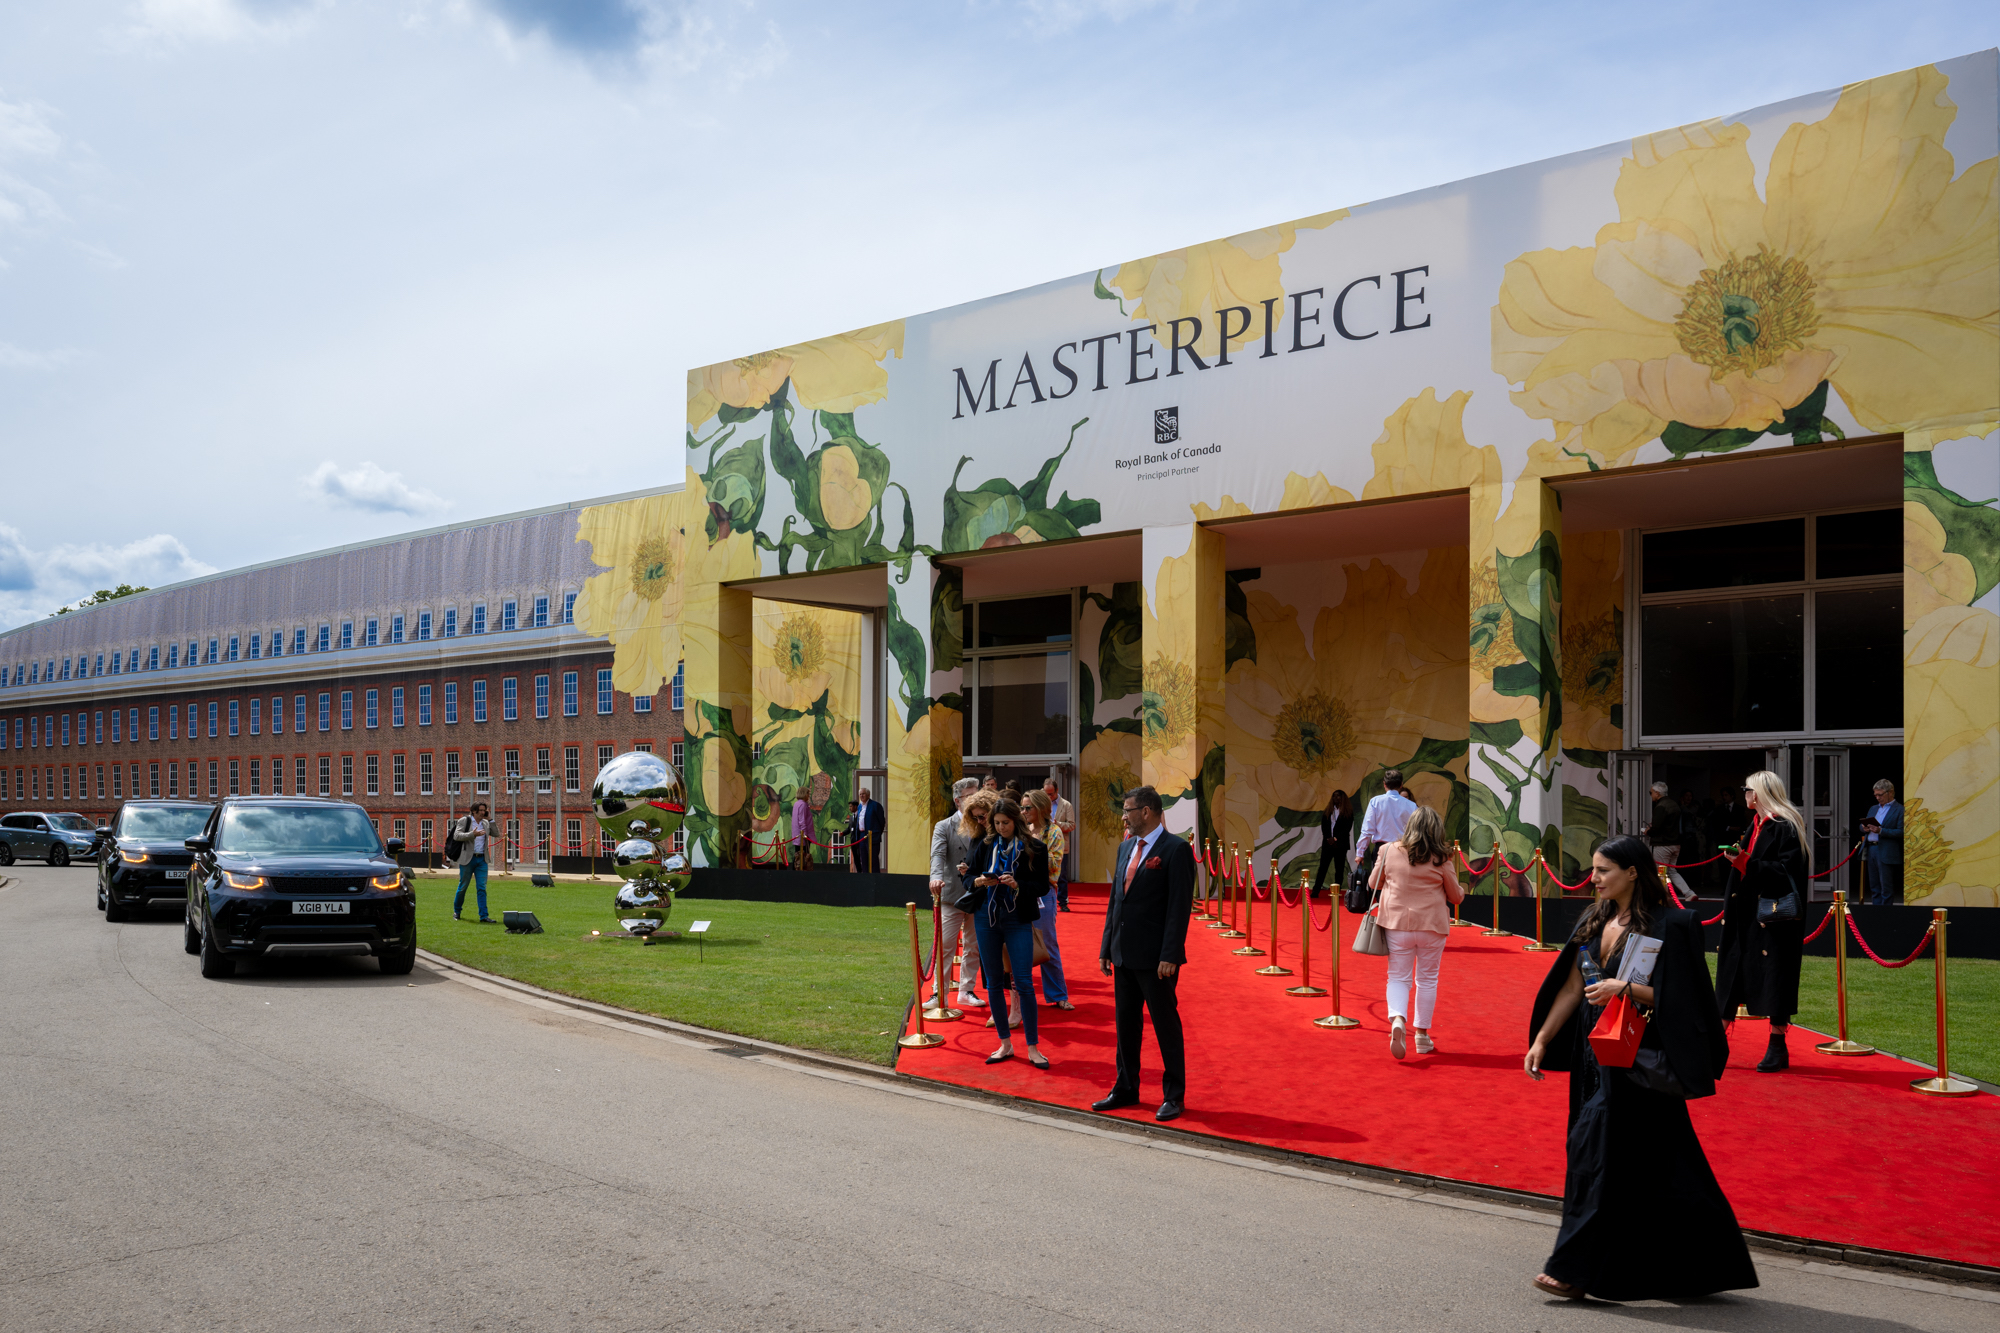 The entrance to Masterpiece London 2022